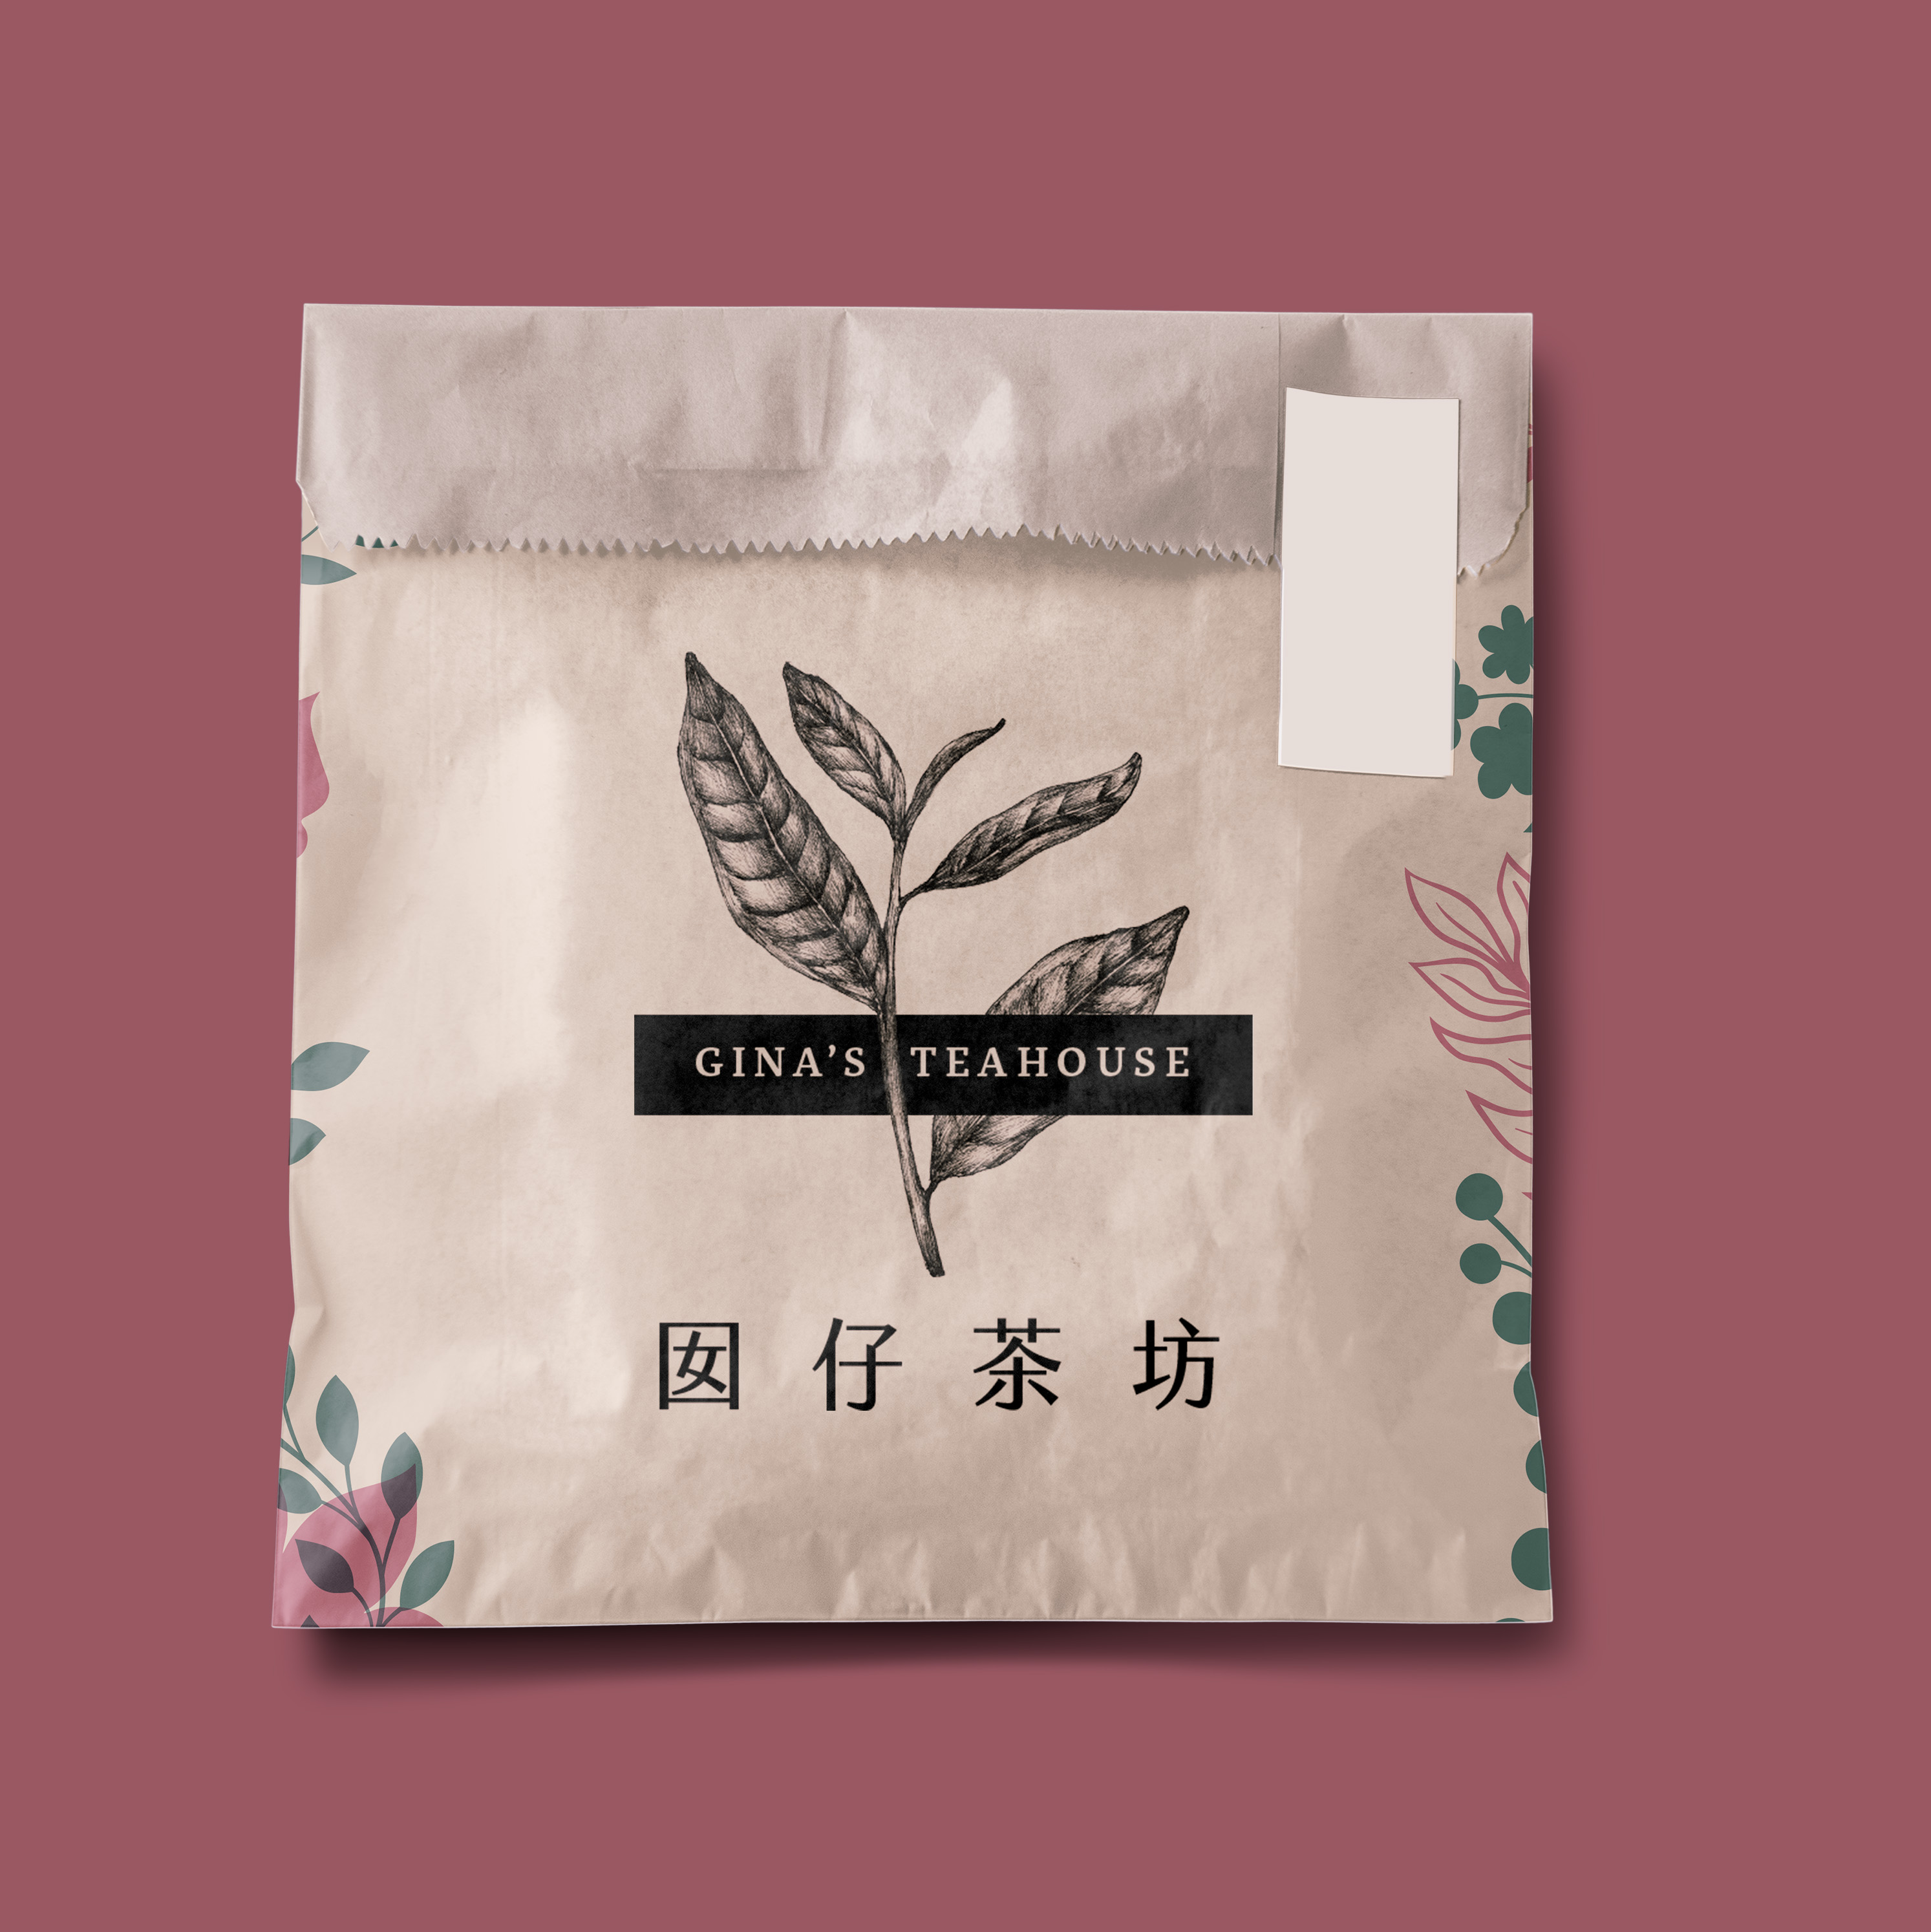 A mockup image of a light brown paper wrapping bag, such as for a cookie or pastry. On it is printed a logo reading 'Gina's Teahouse' in black with a vintage illustration of a tea leaf sprig. It is surrounded by green and pink floral illustrations.